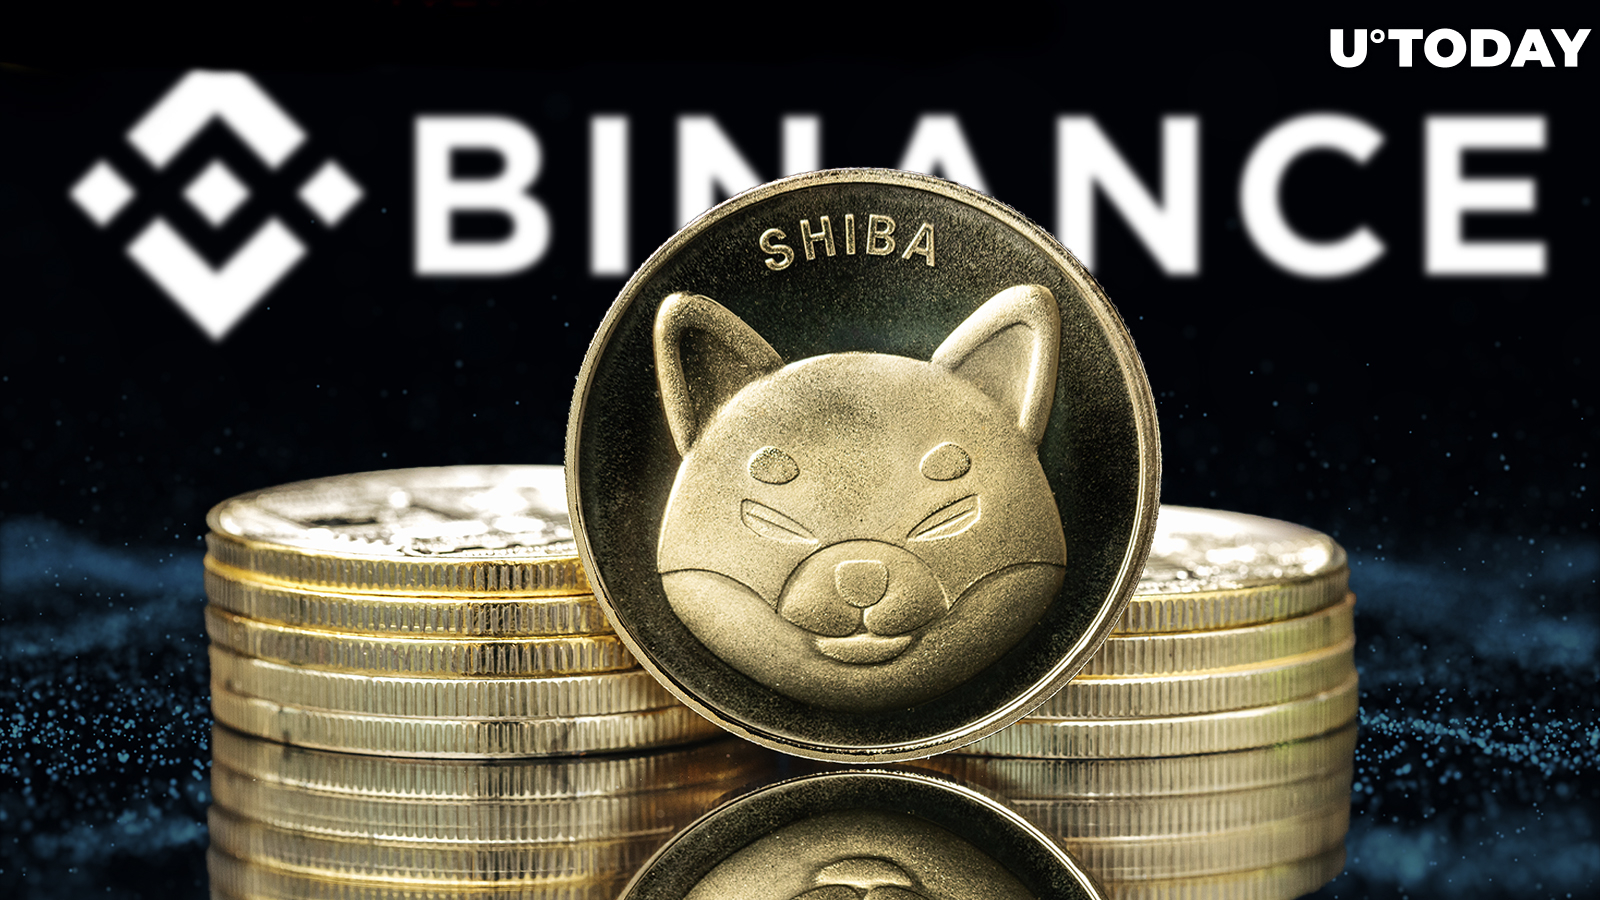 Shiba Inu (SHIB) Added as New Collateral Asset by Binance